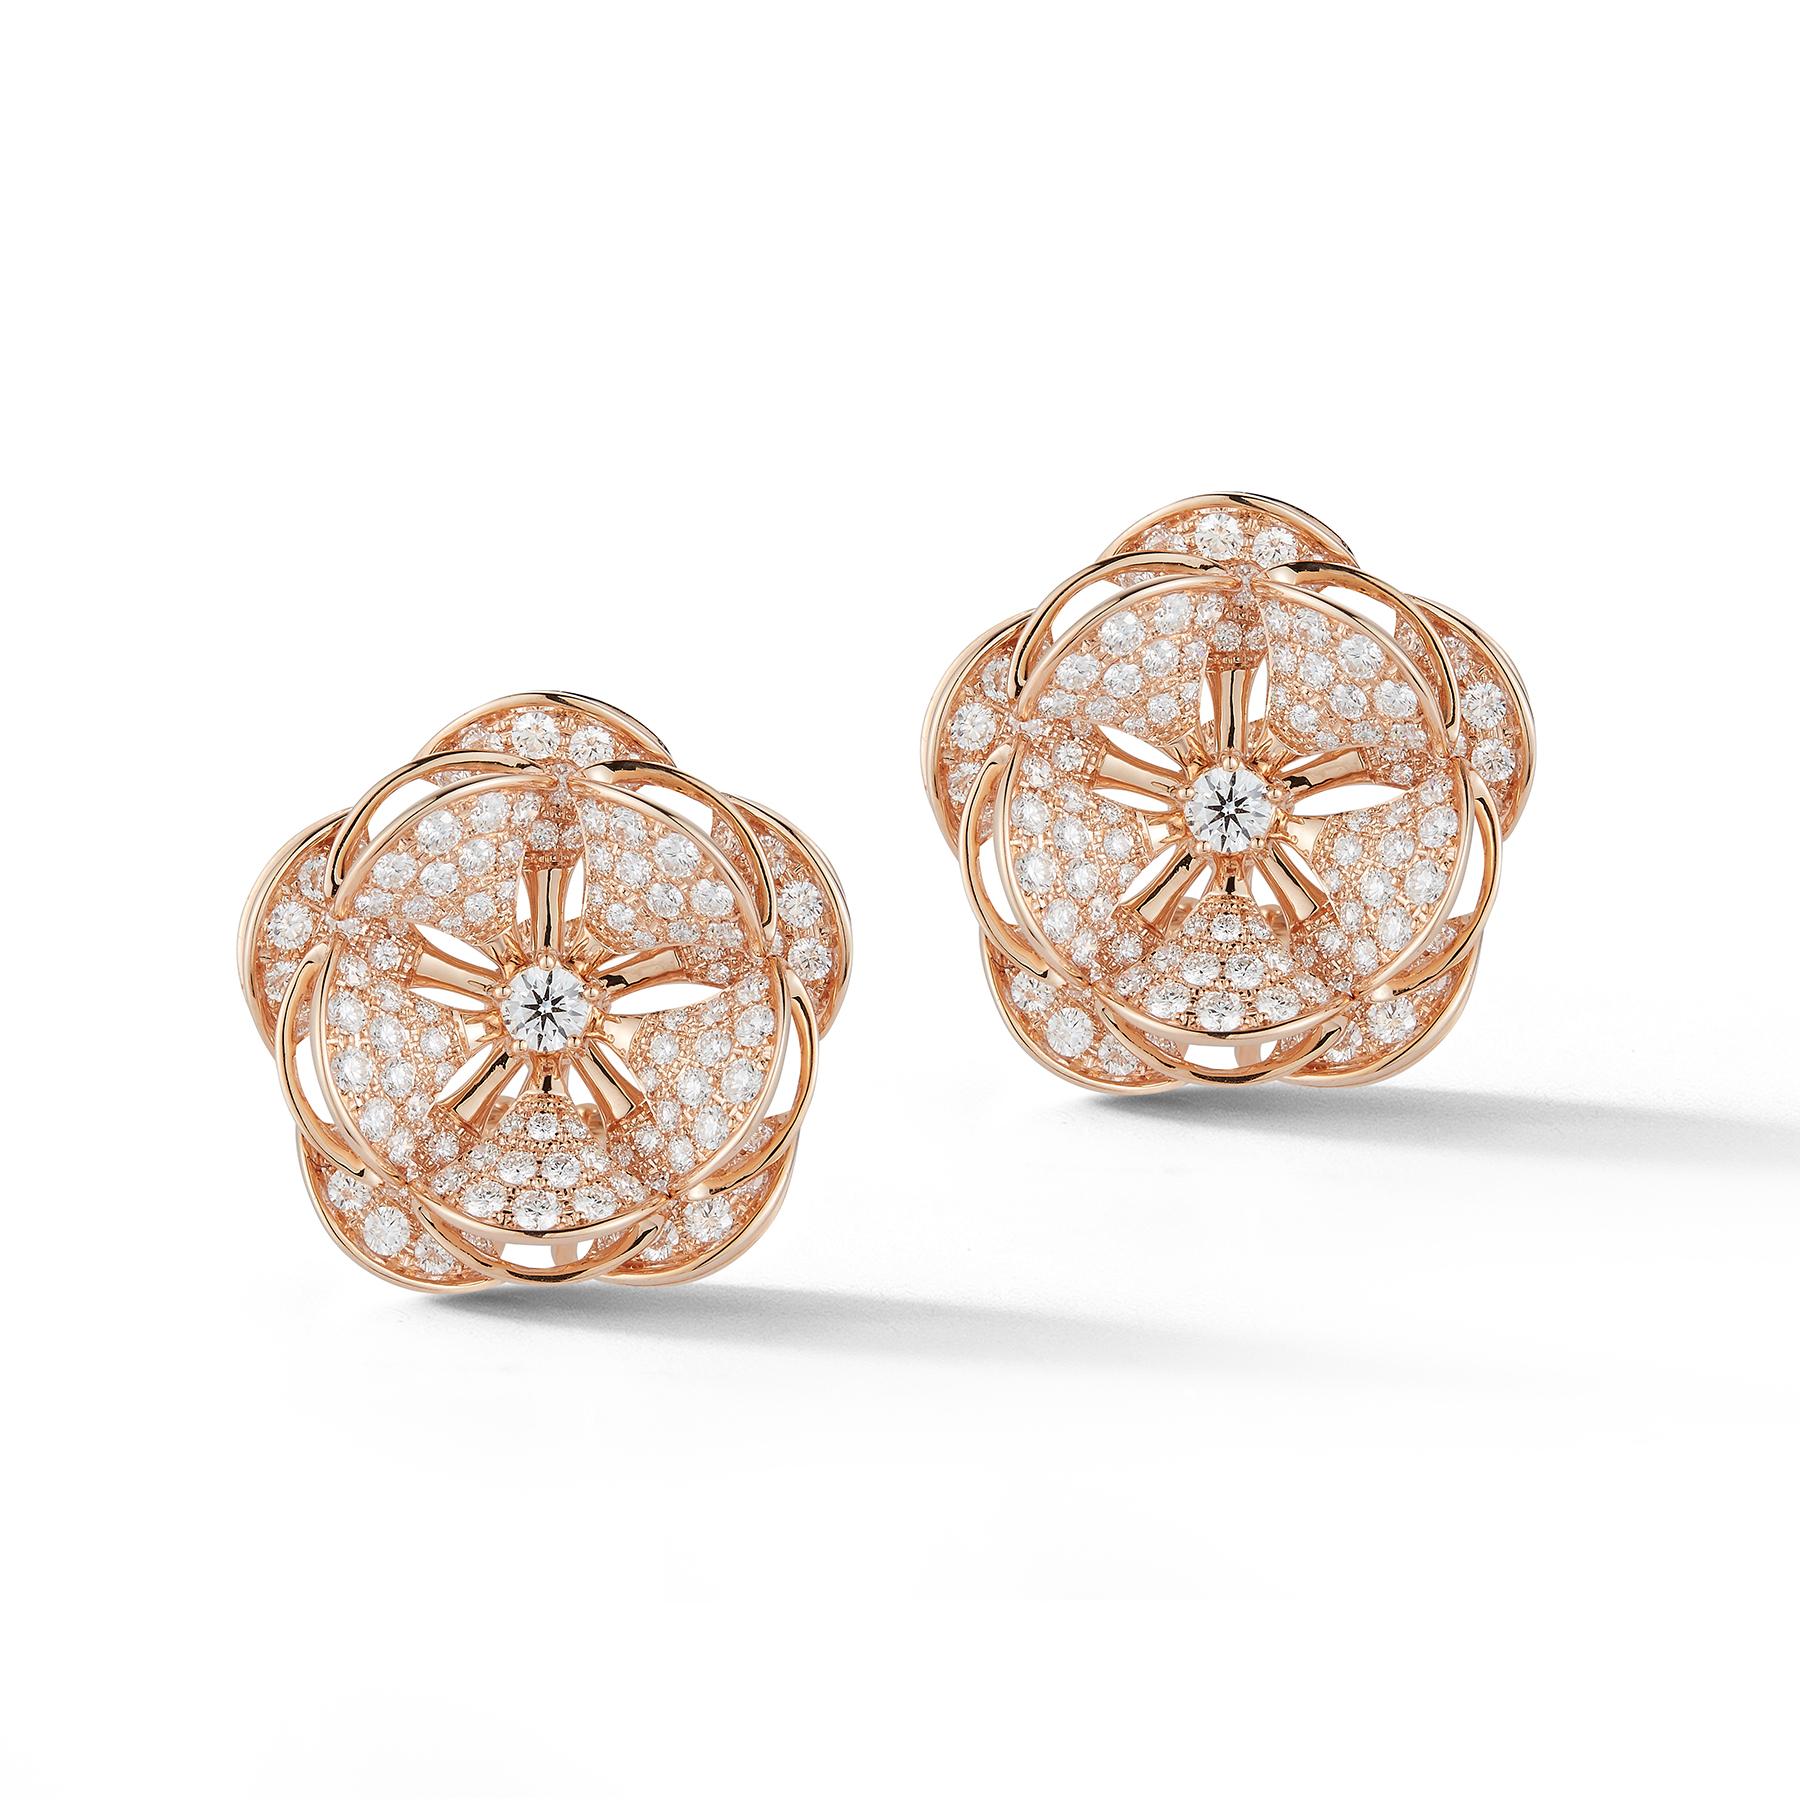 Round Cut Gorgeous 18 Karat Pink Gold Flower-Shaped Statement Earrings with 242 Diamonds For Sale